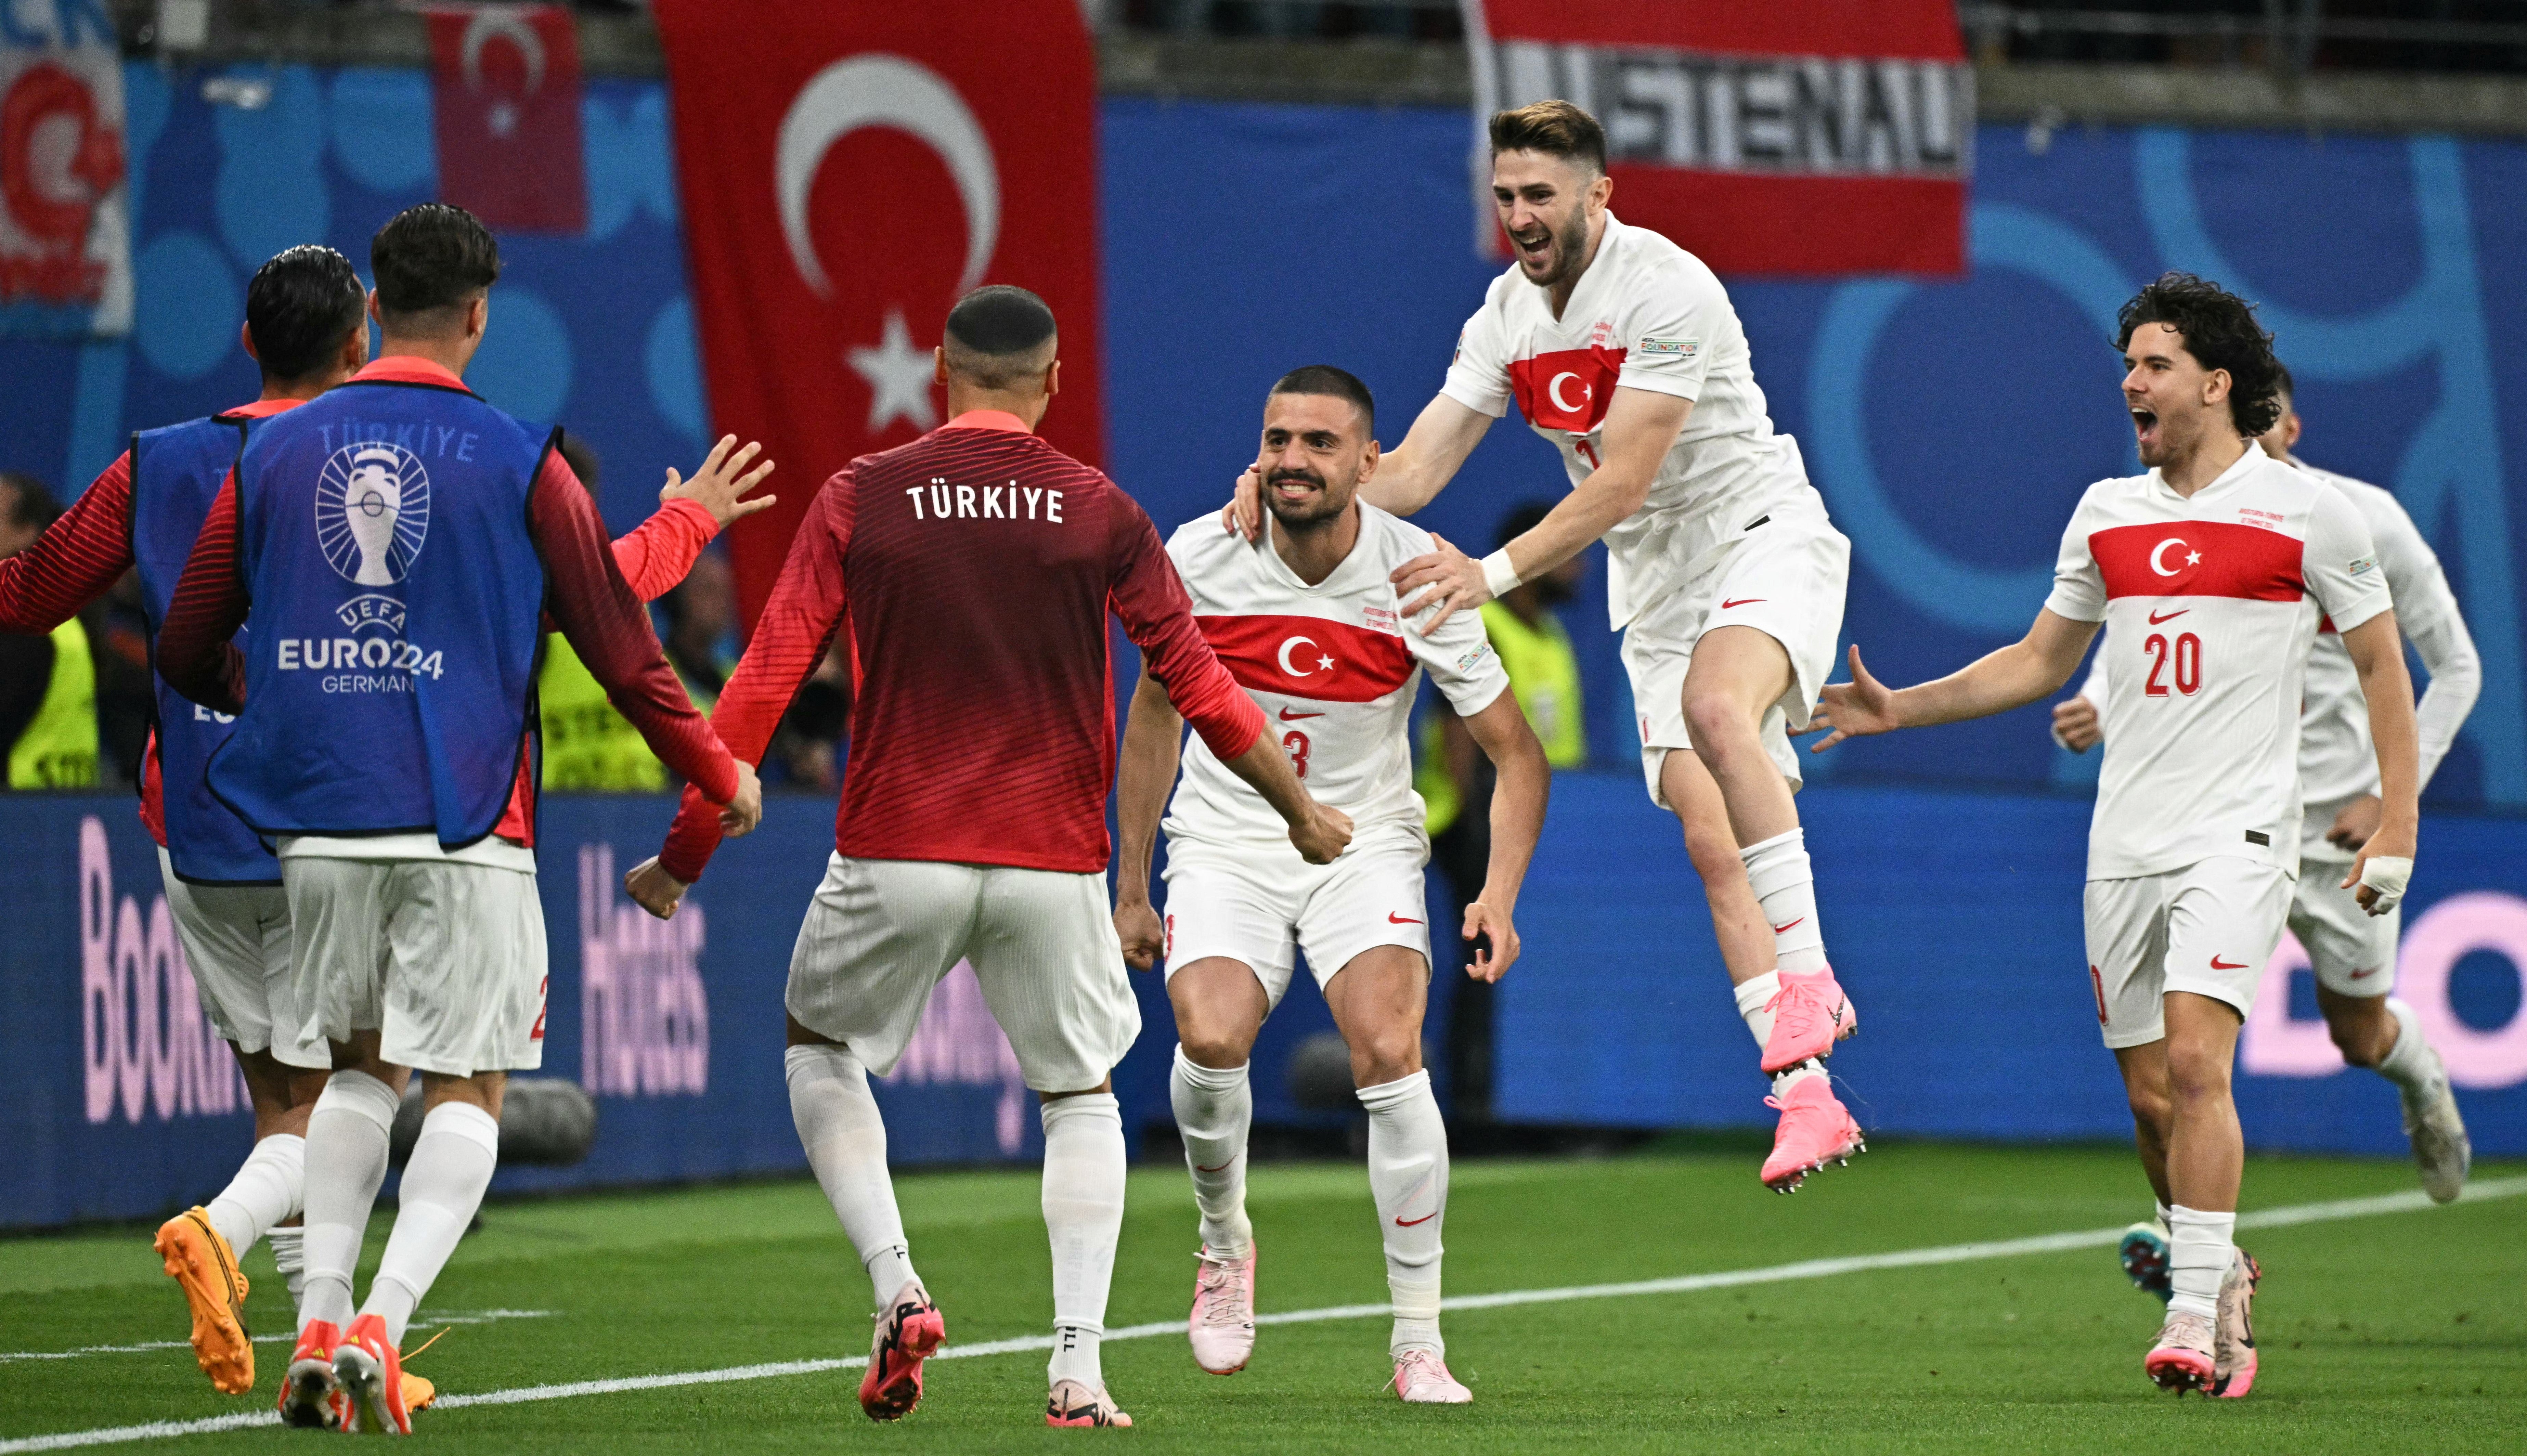 Turkey celebrate their opening goal after less than a minute